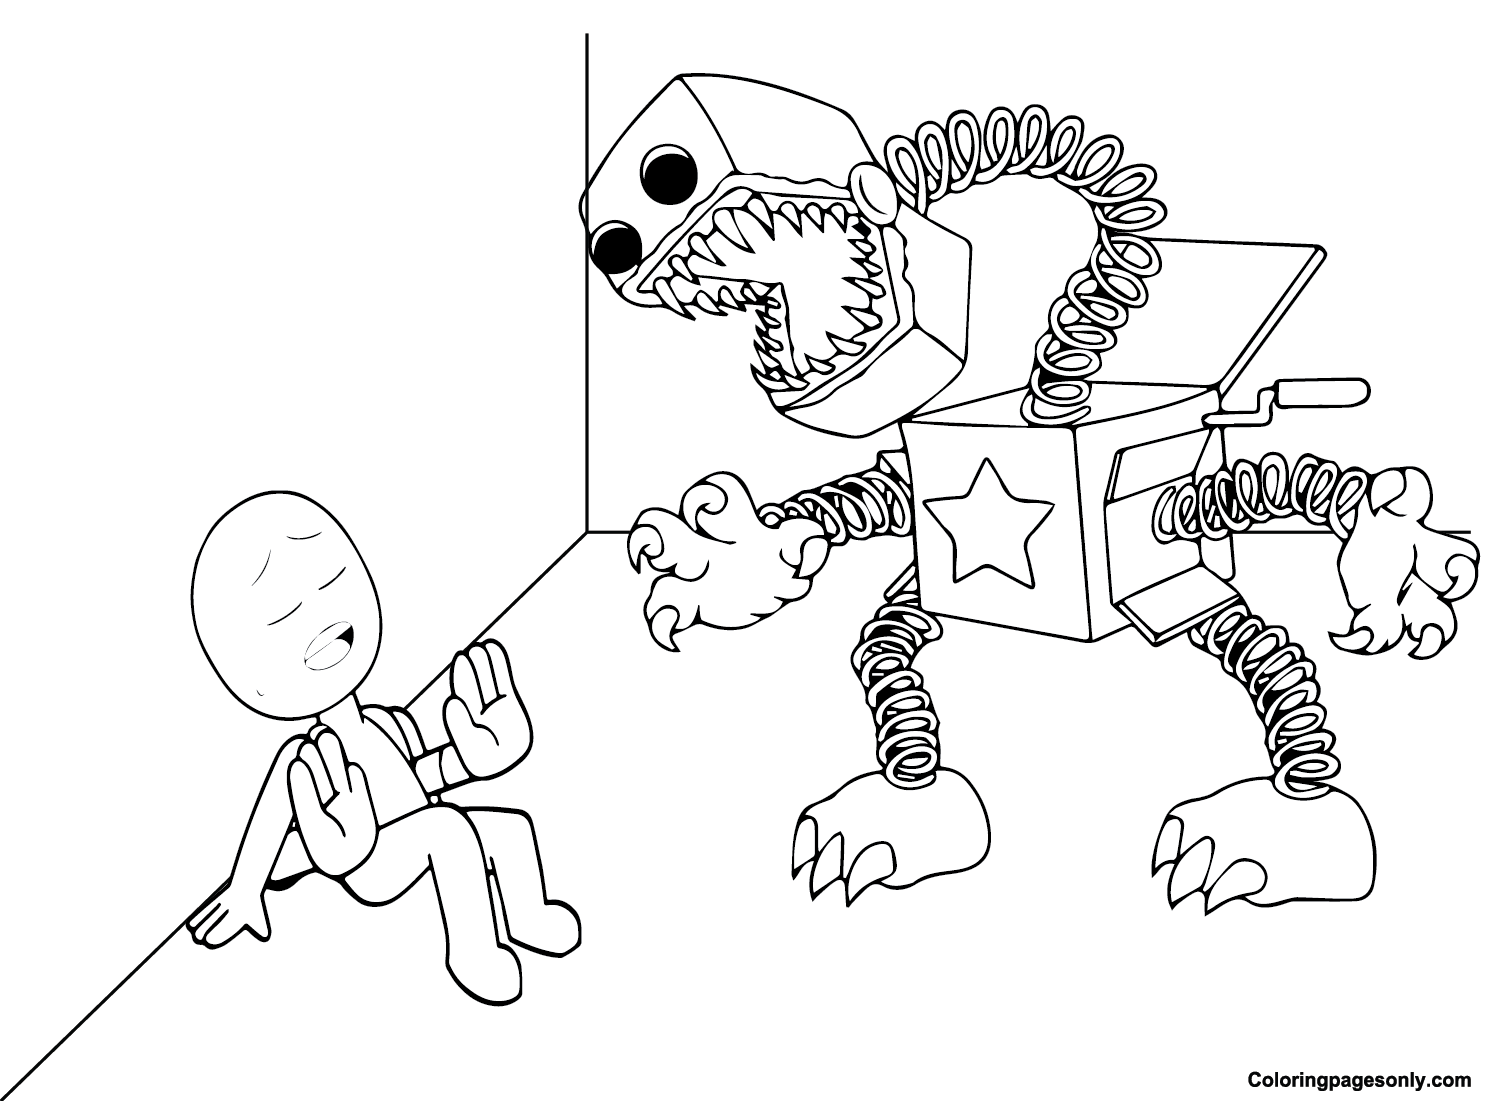 Boxy Boo Color Sheet Coloring Page